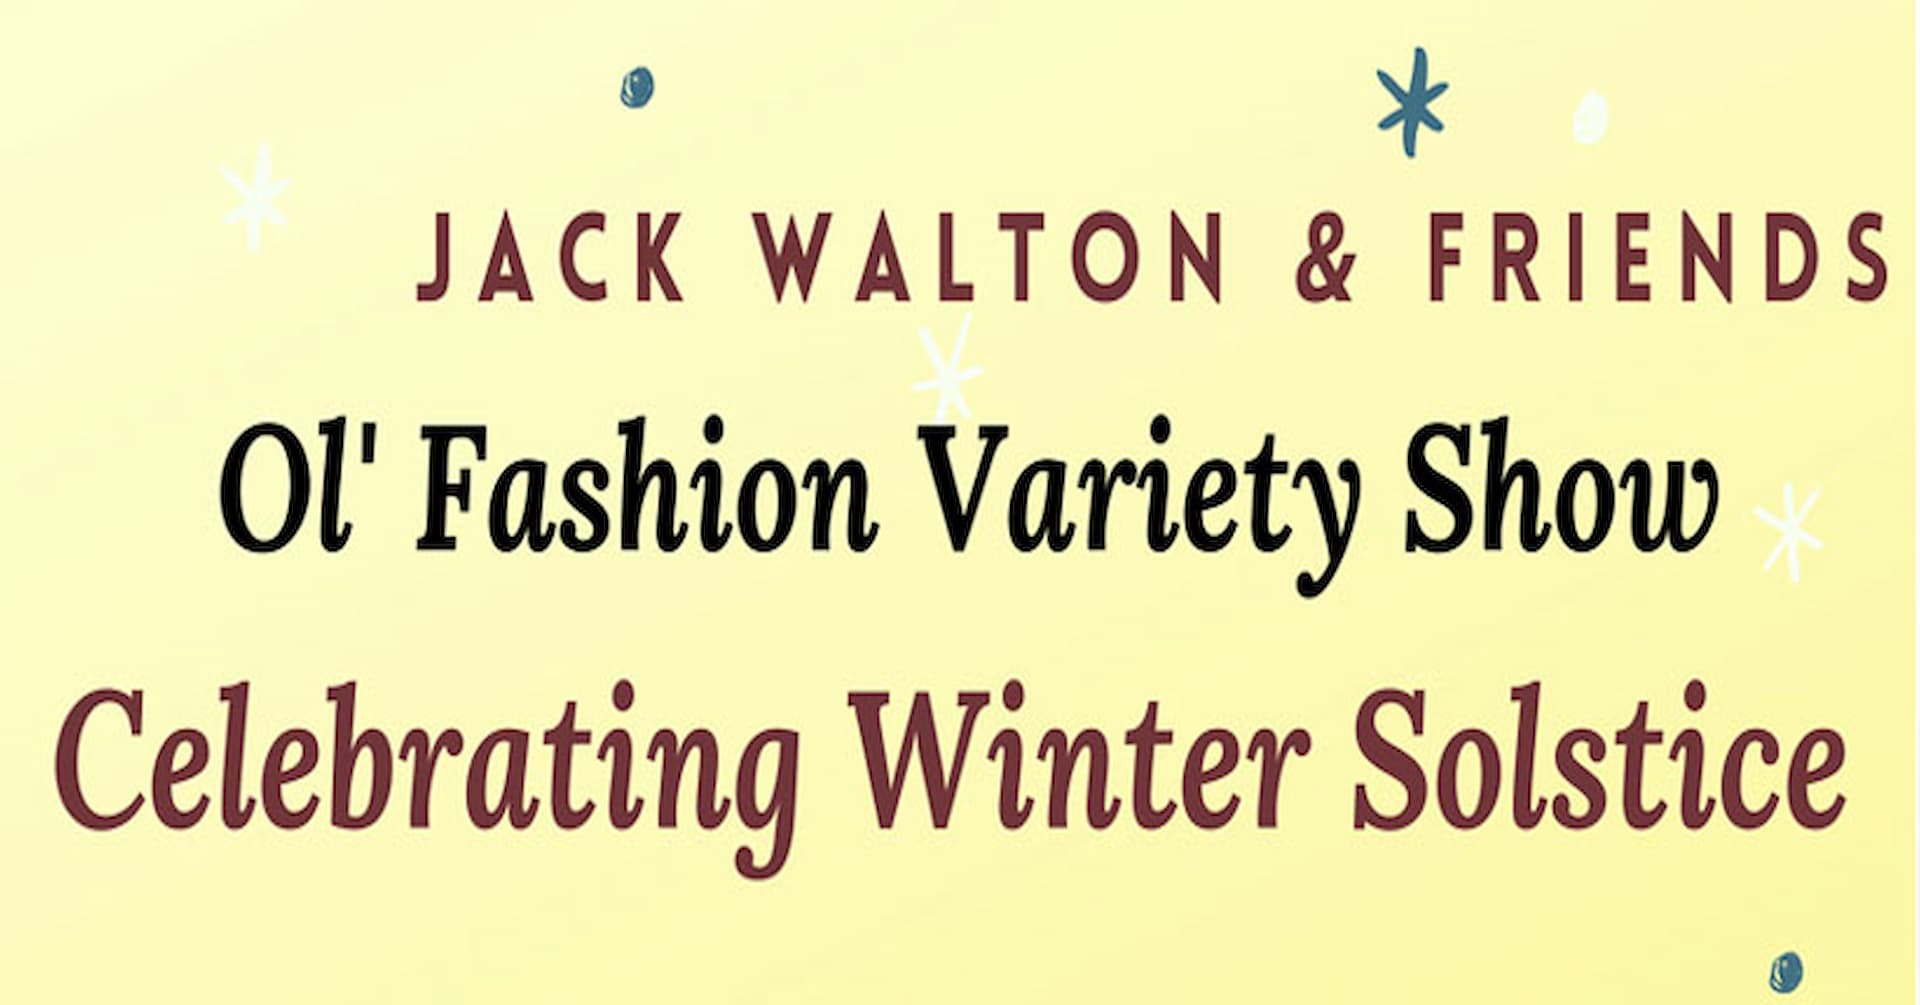 Jack Walton and Friends Old Fashion Variety Show Celebrating Winter Solstice